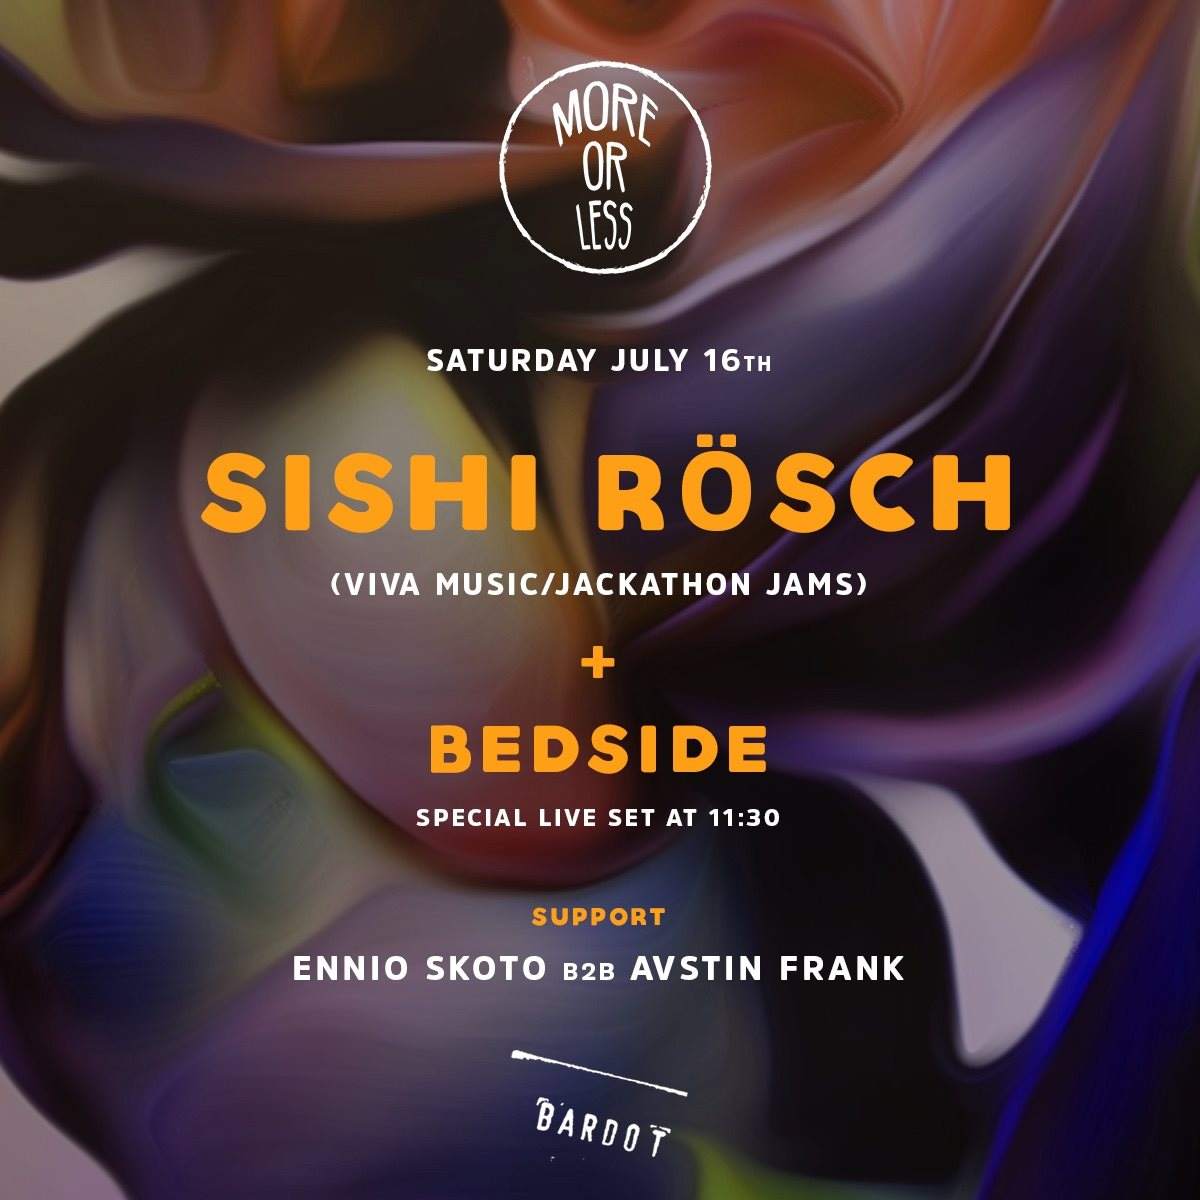 More or Less presents: Sishi Rösch & Bedside Live - フライヤー表